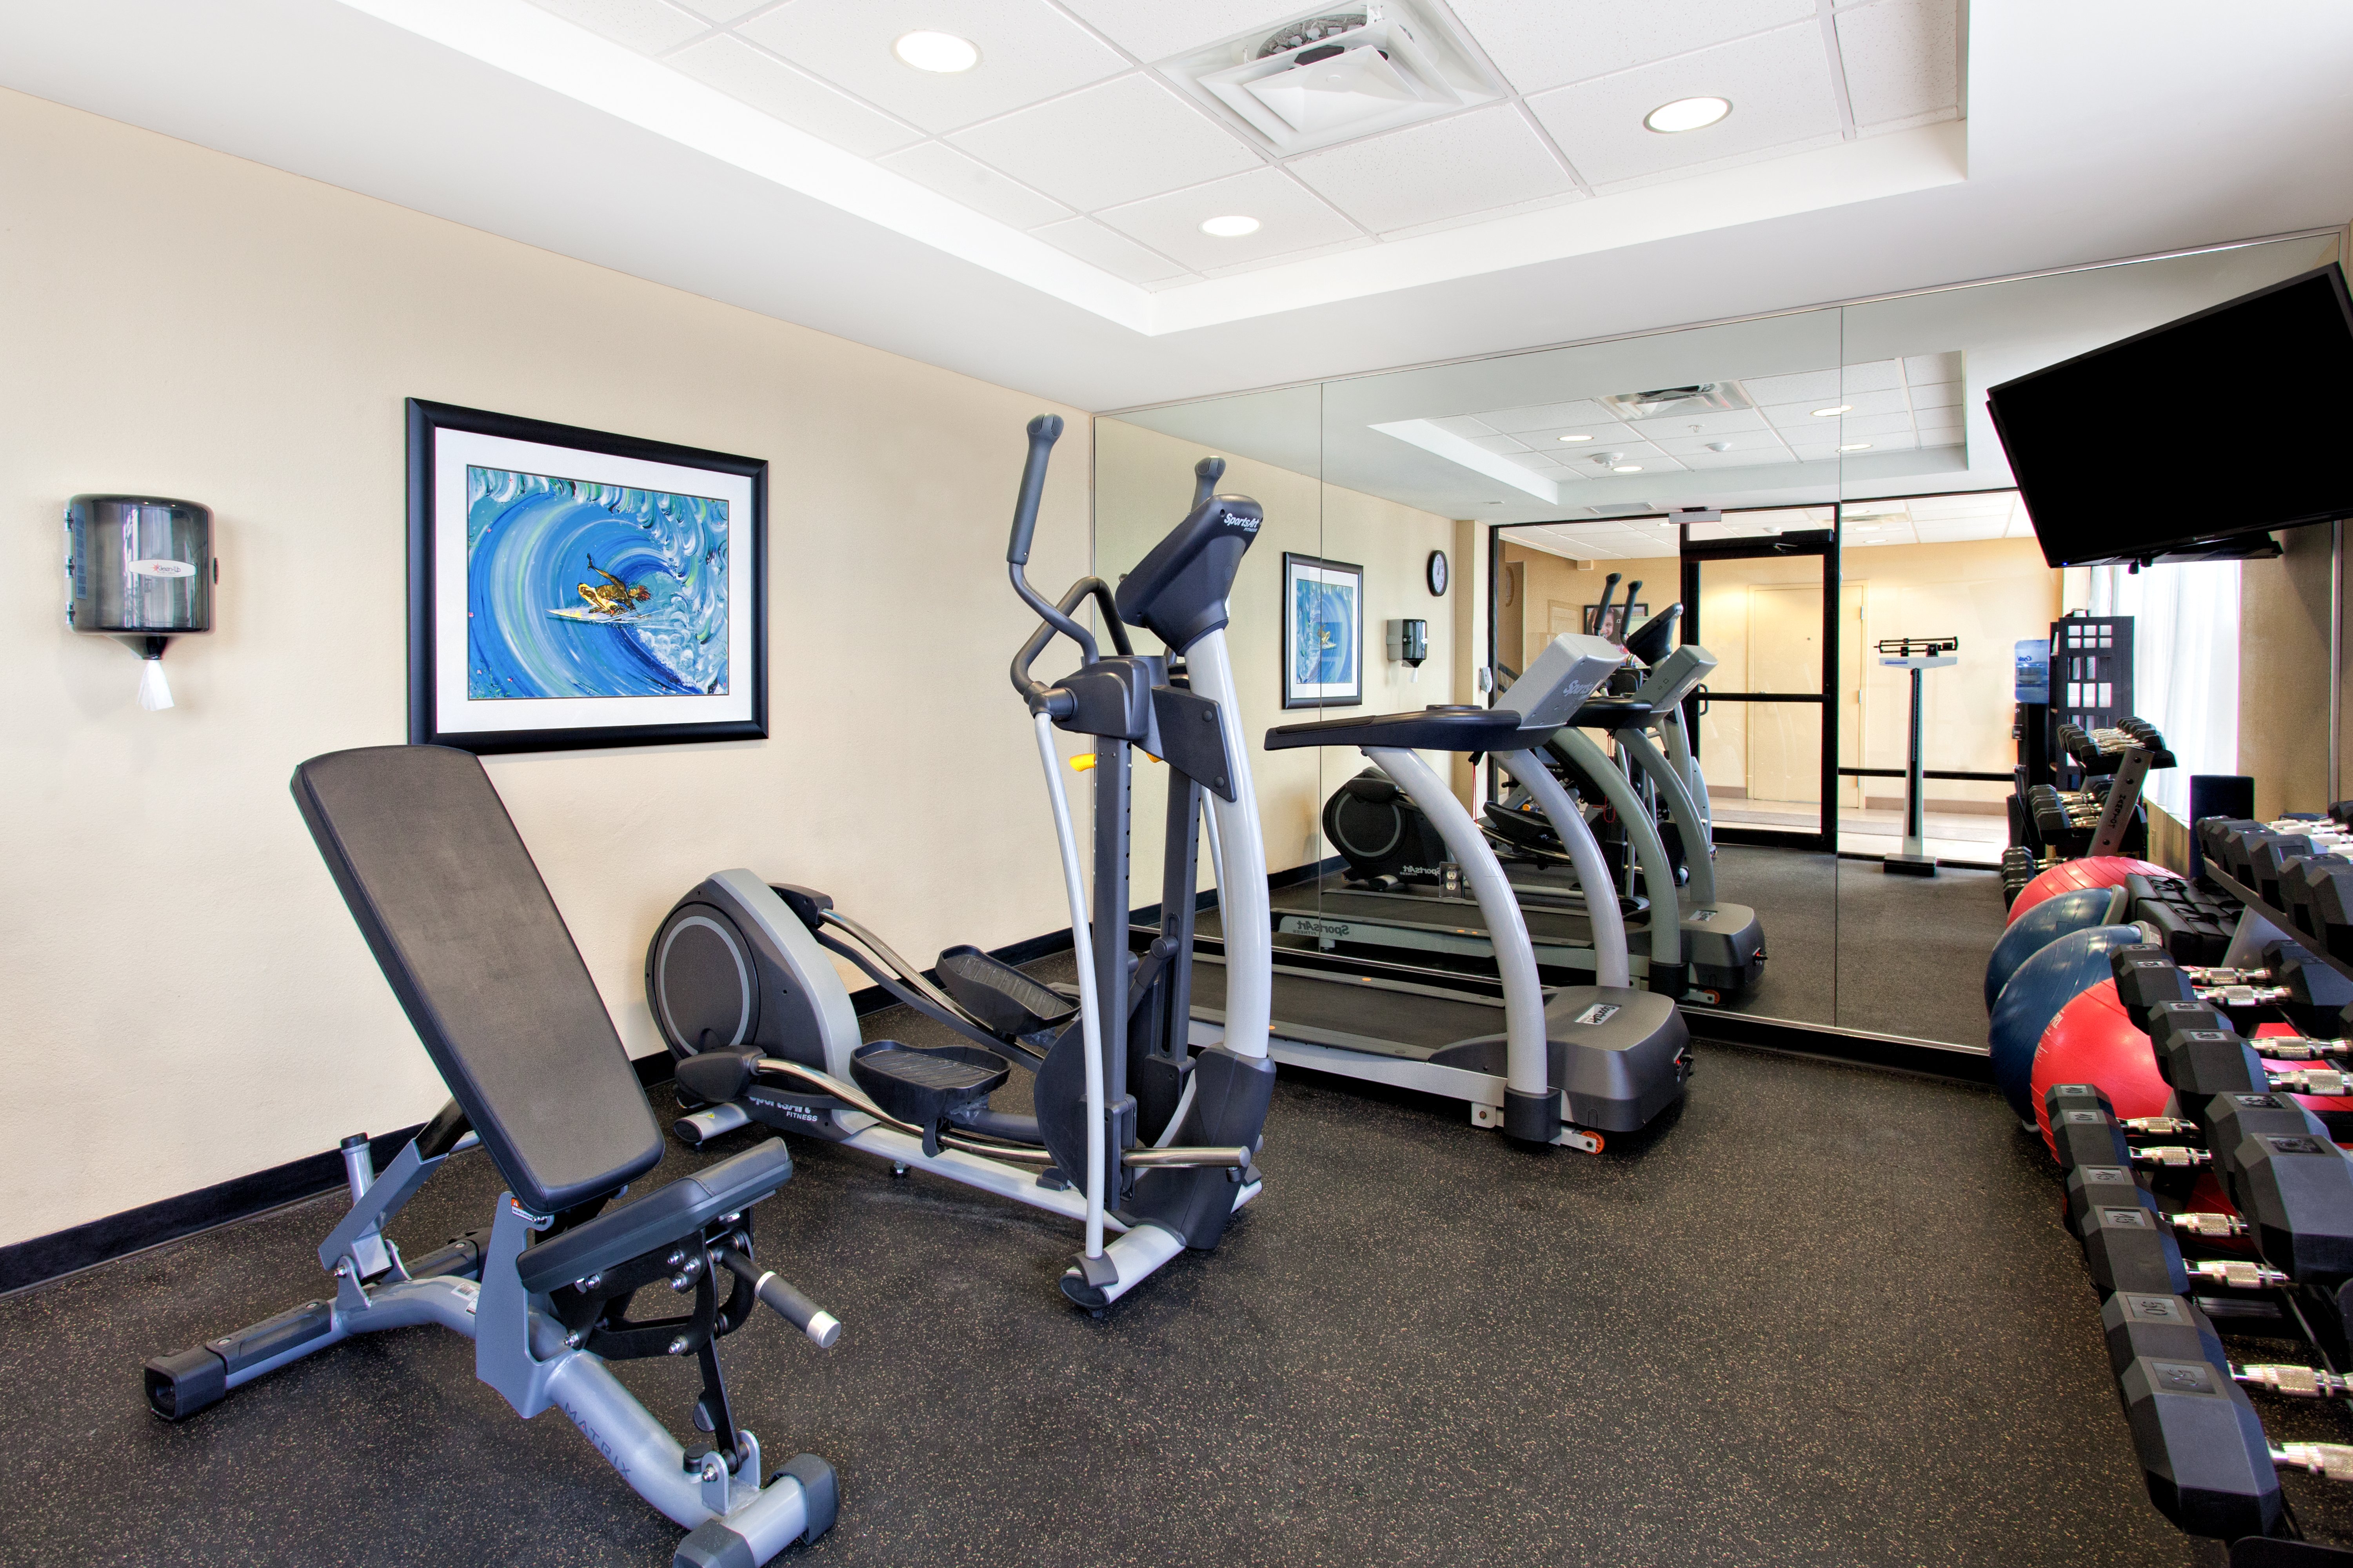 Get fit at our 24 hour fitness center